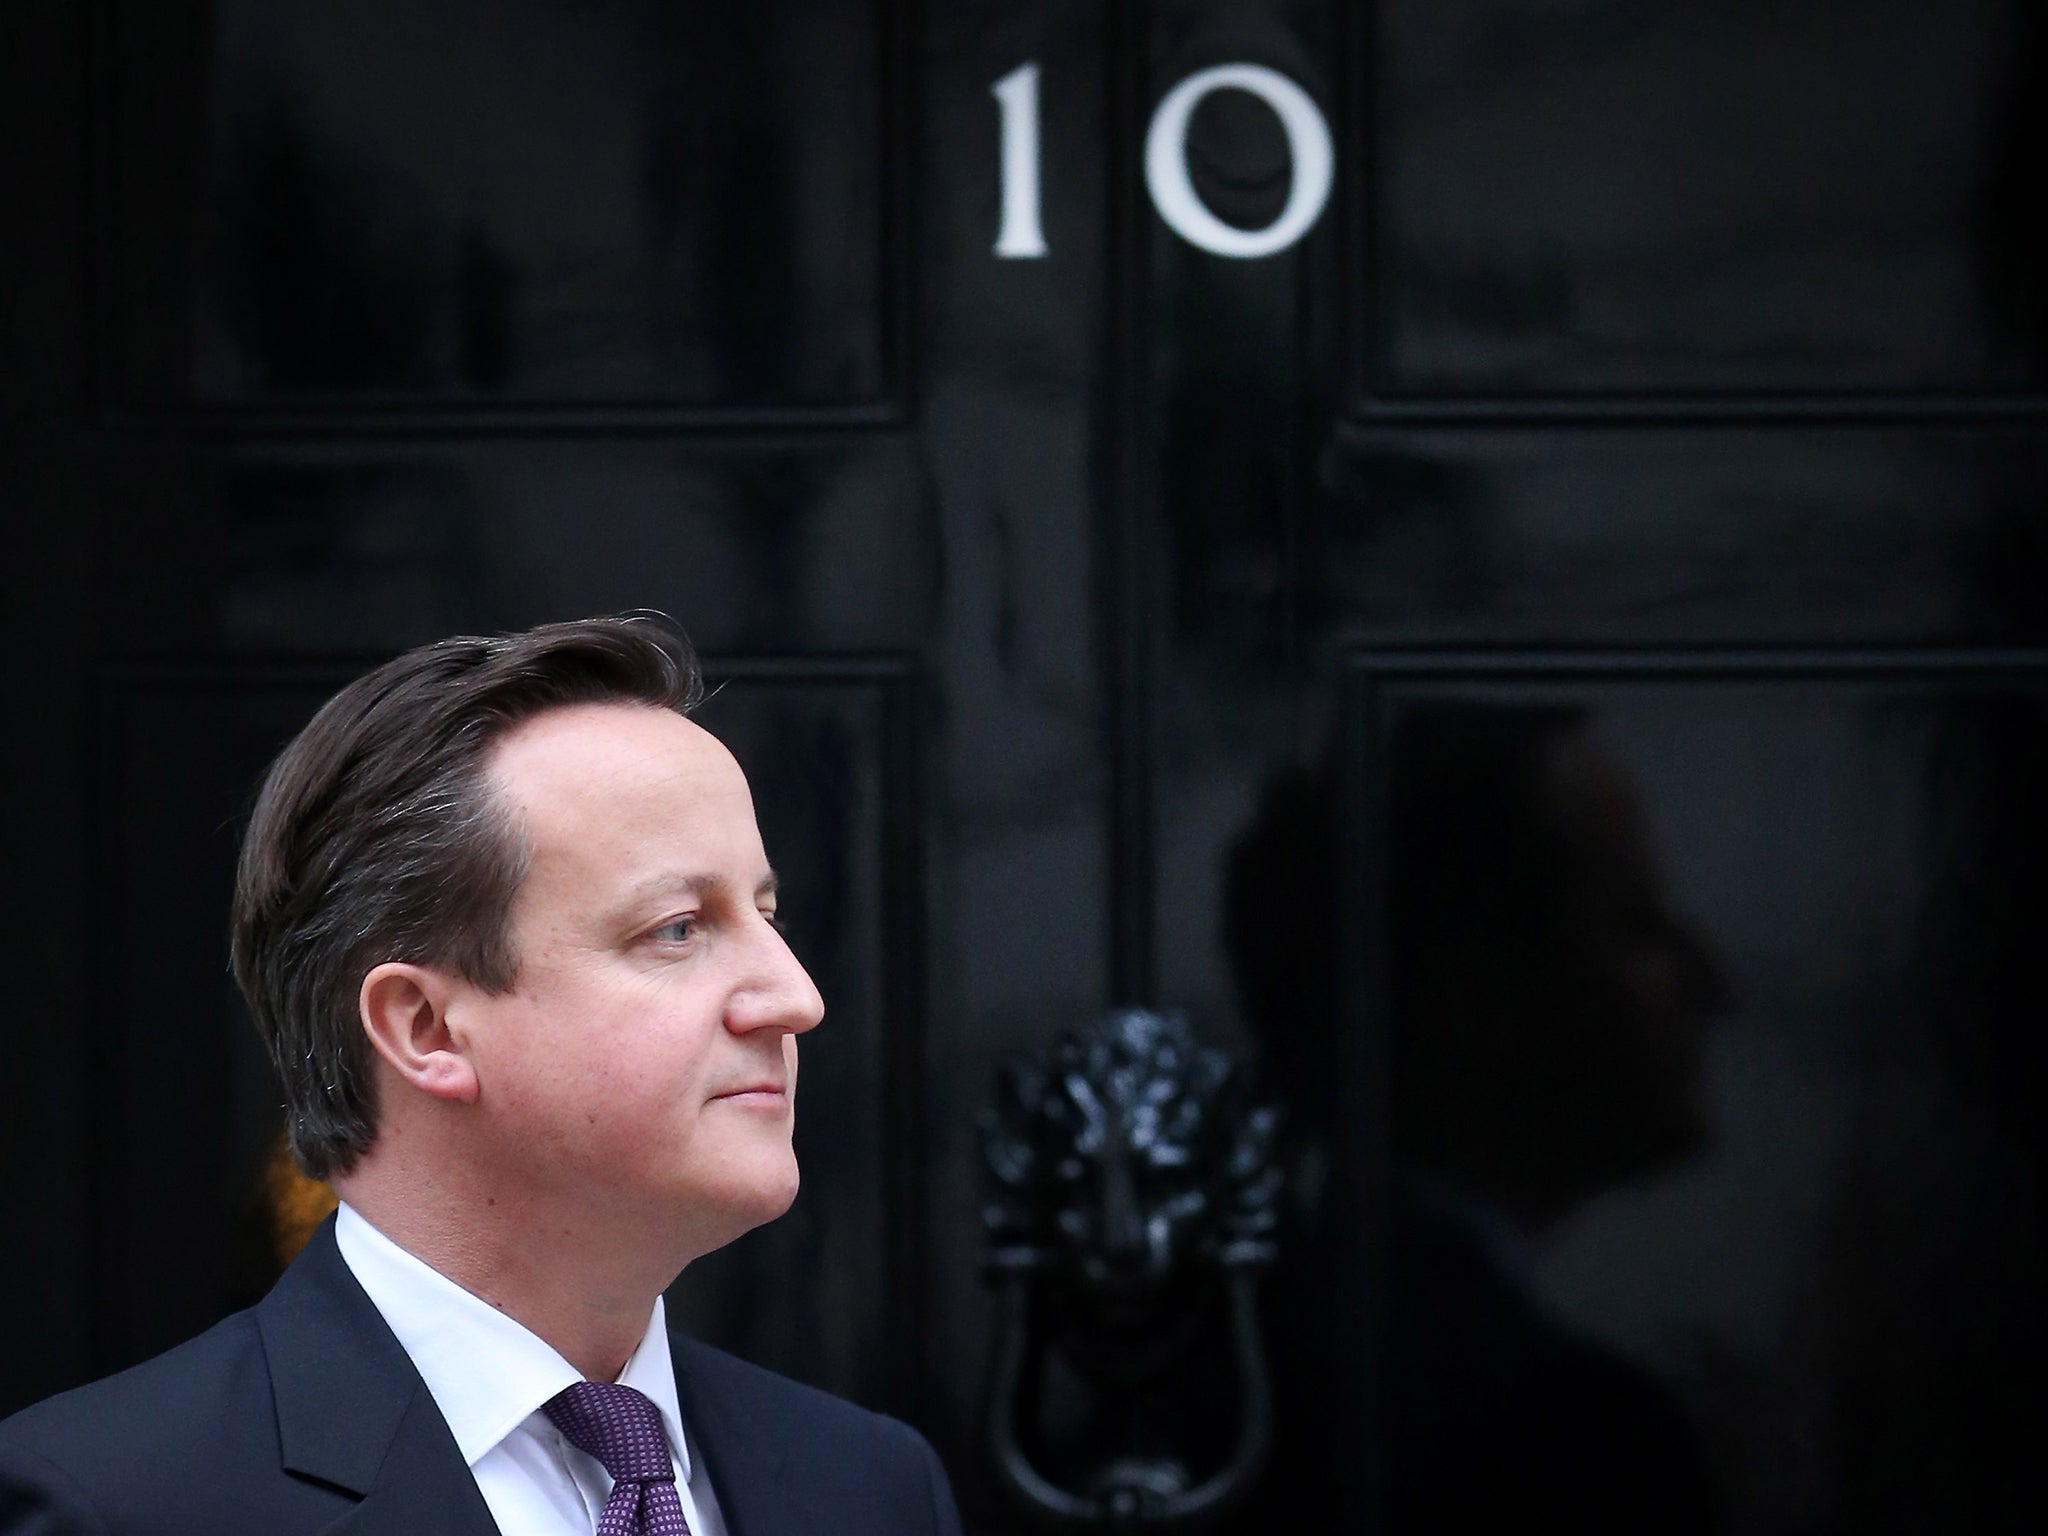 Labour are forewarning that David Cameron might try to “squat” in Downing Street after the election (Getty)